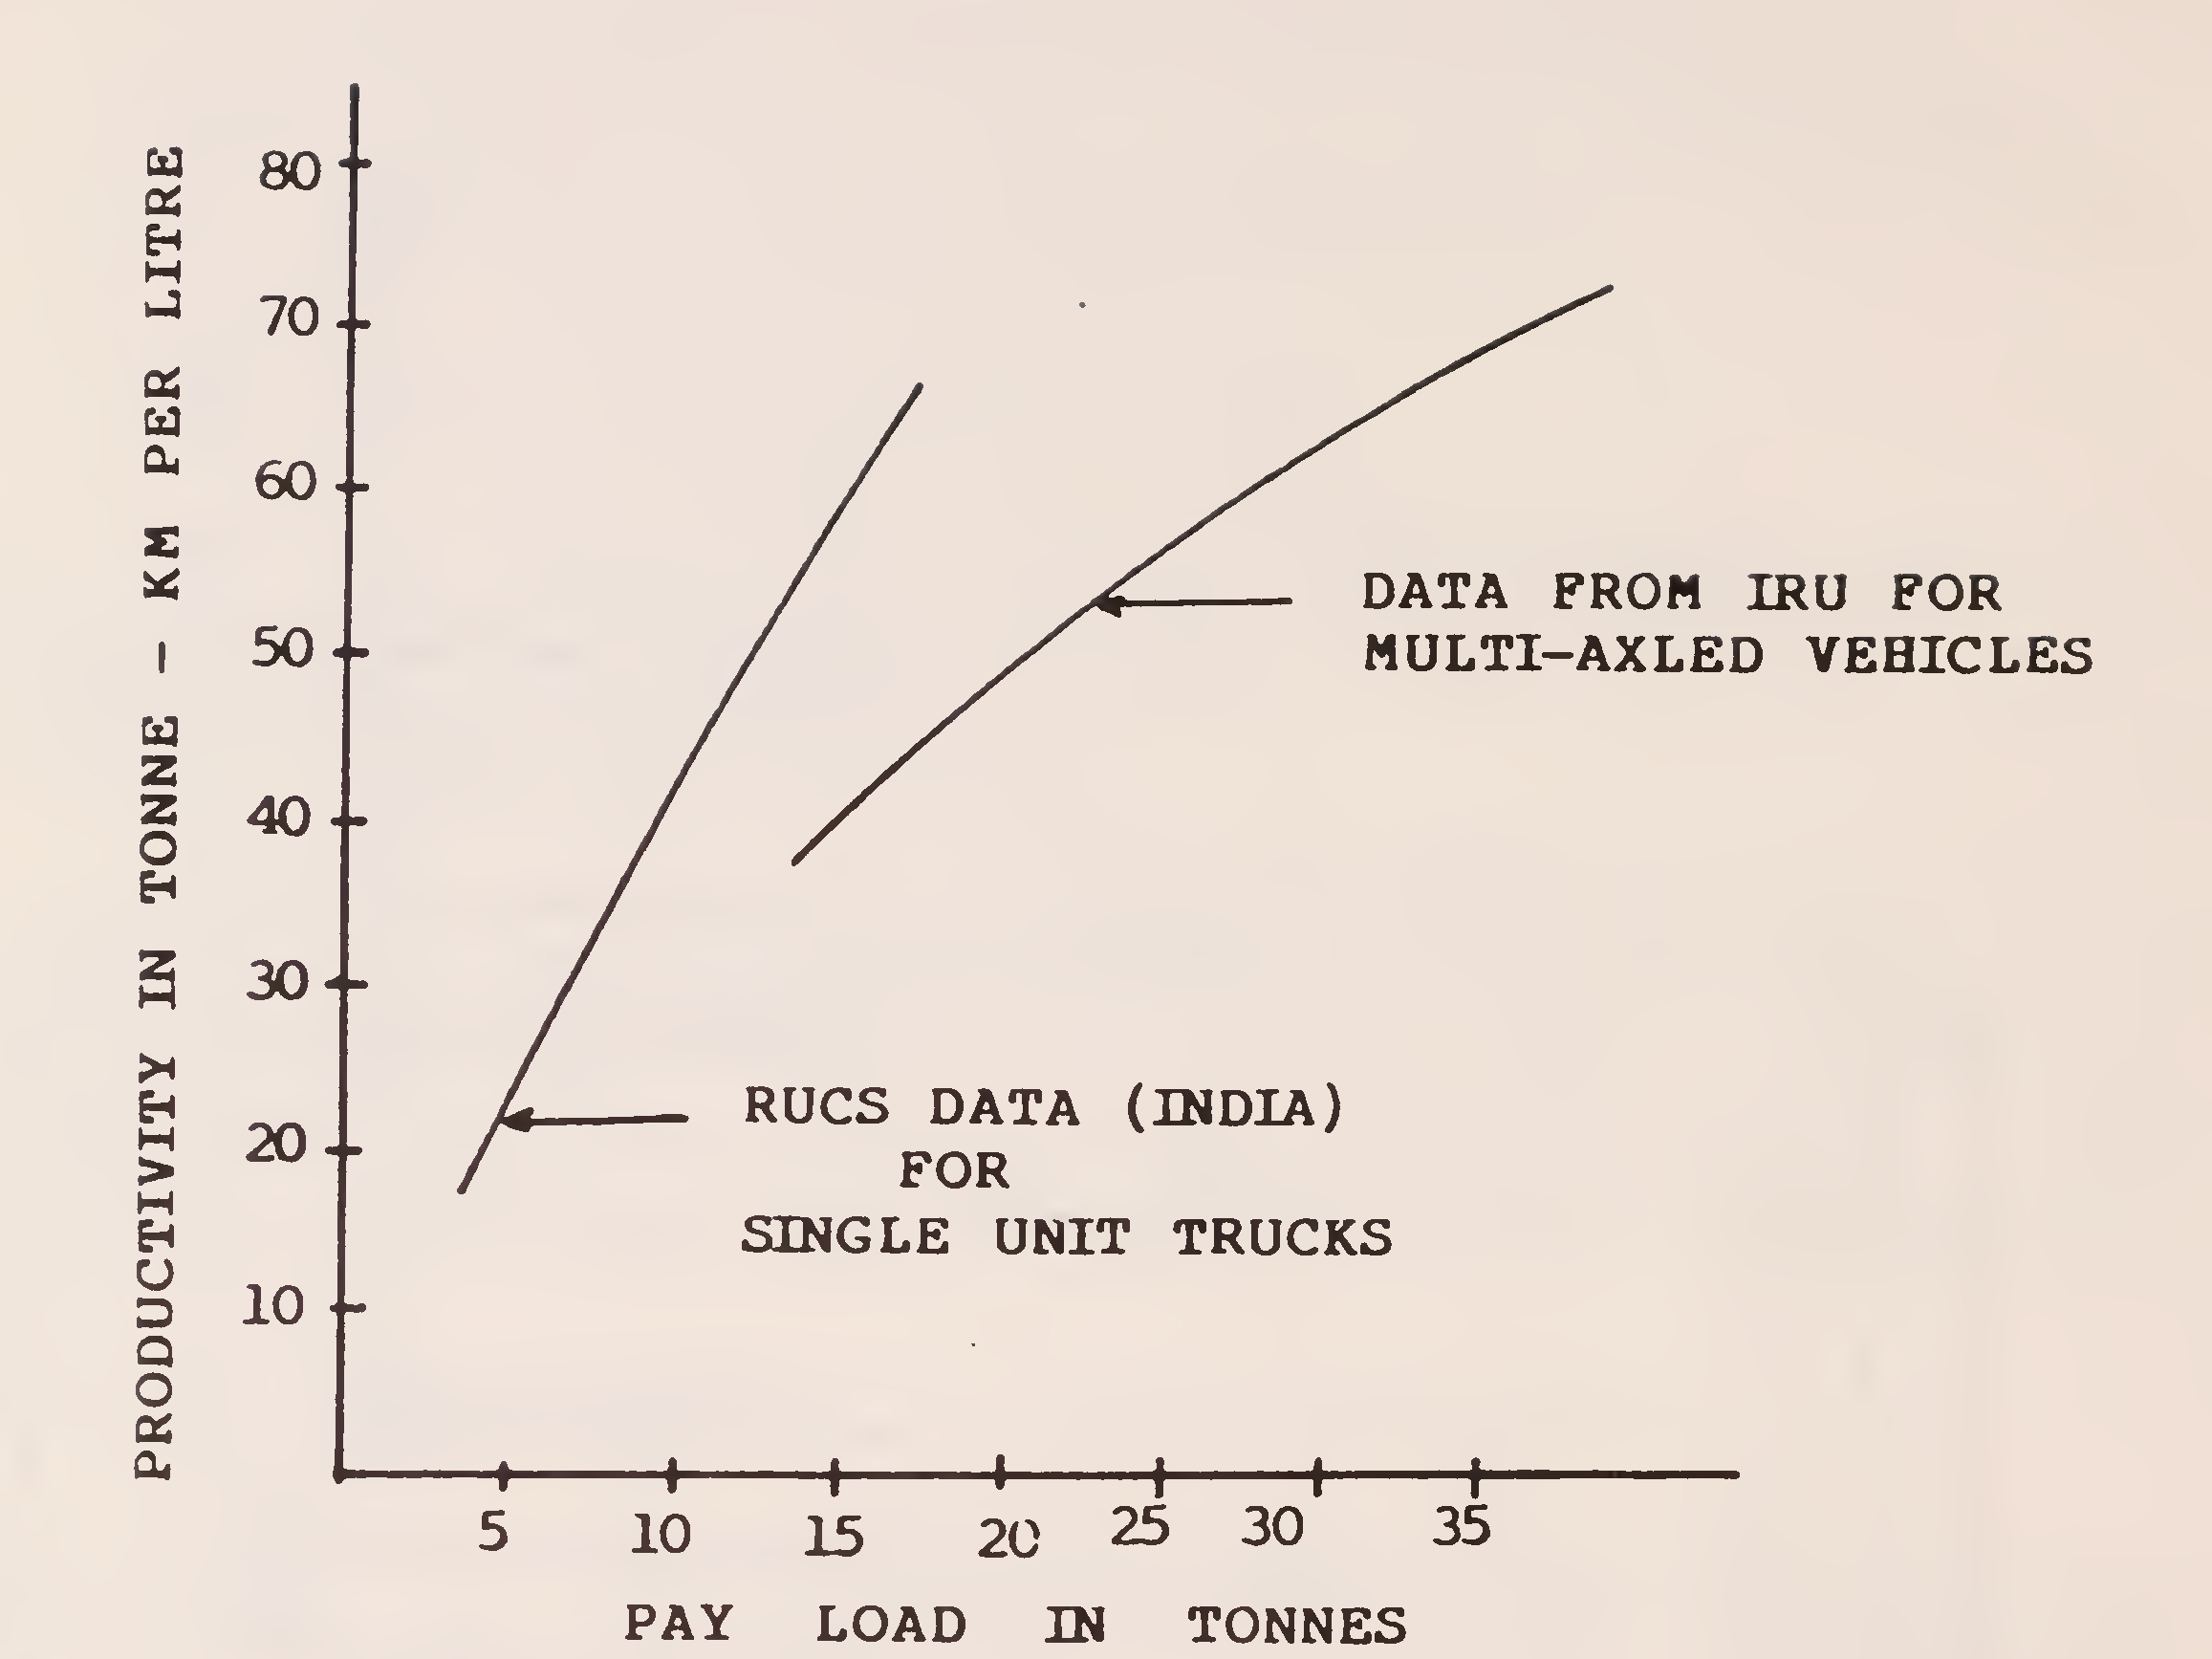 Fig. 20. Productivity of fuel for various pay-loads